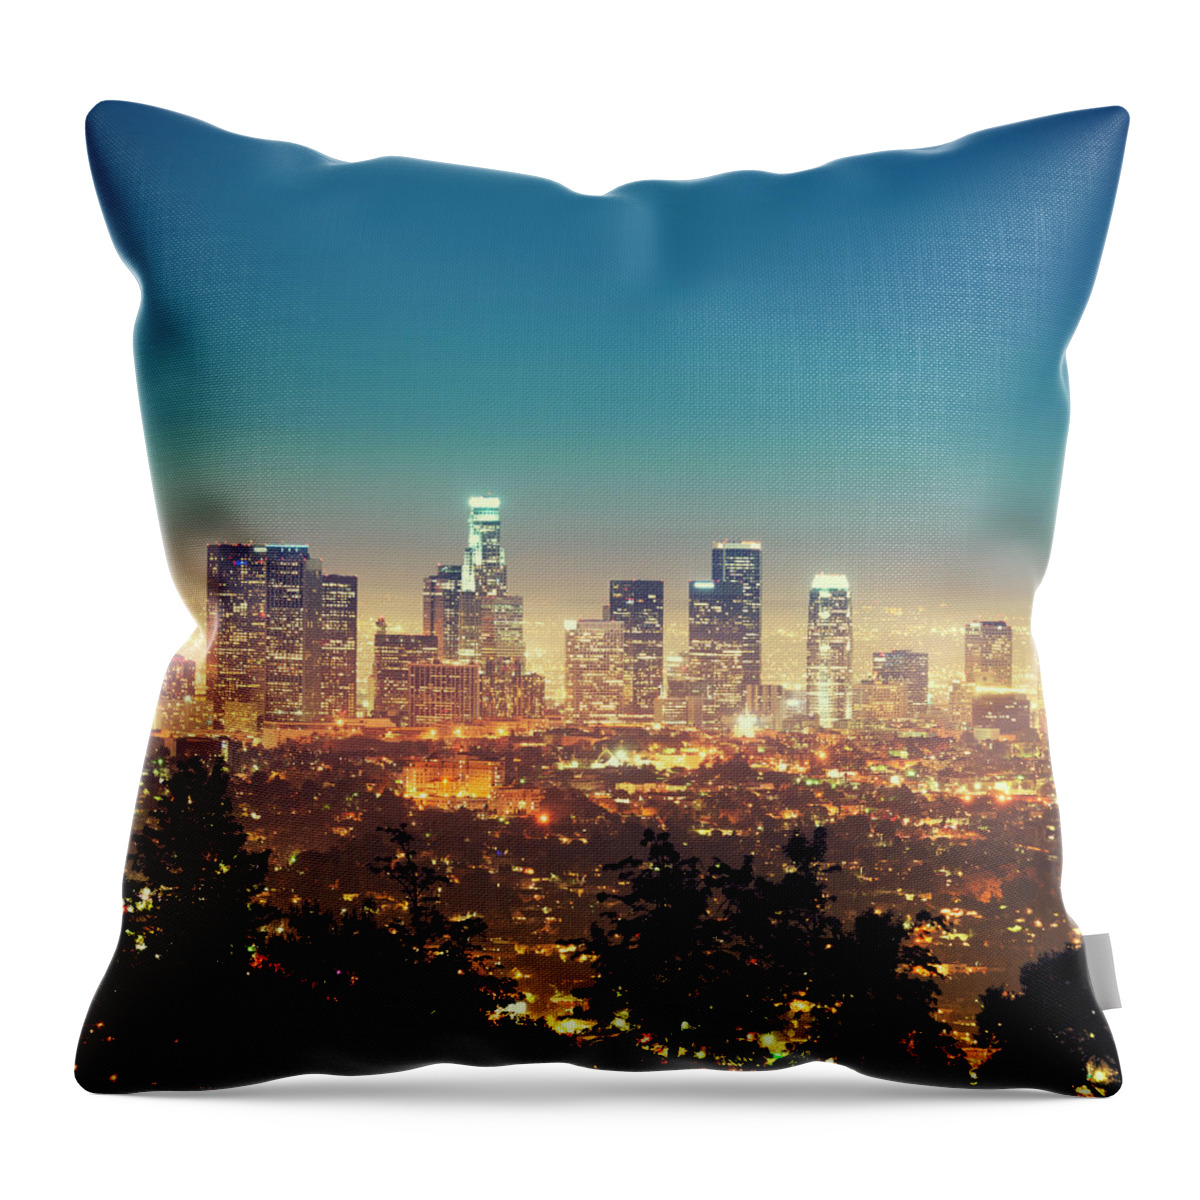 Built Structure Throw Pillow featuring the photograph Los Angeles Skyline by Franckreporter